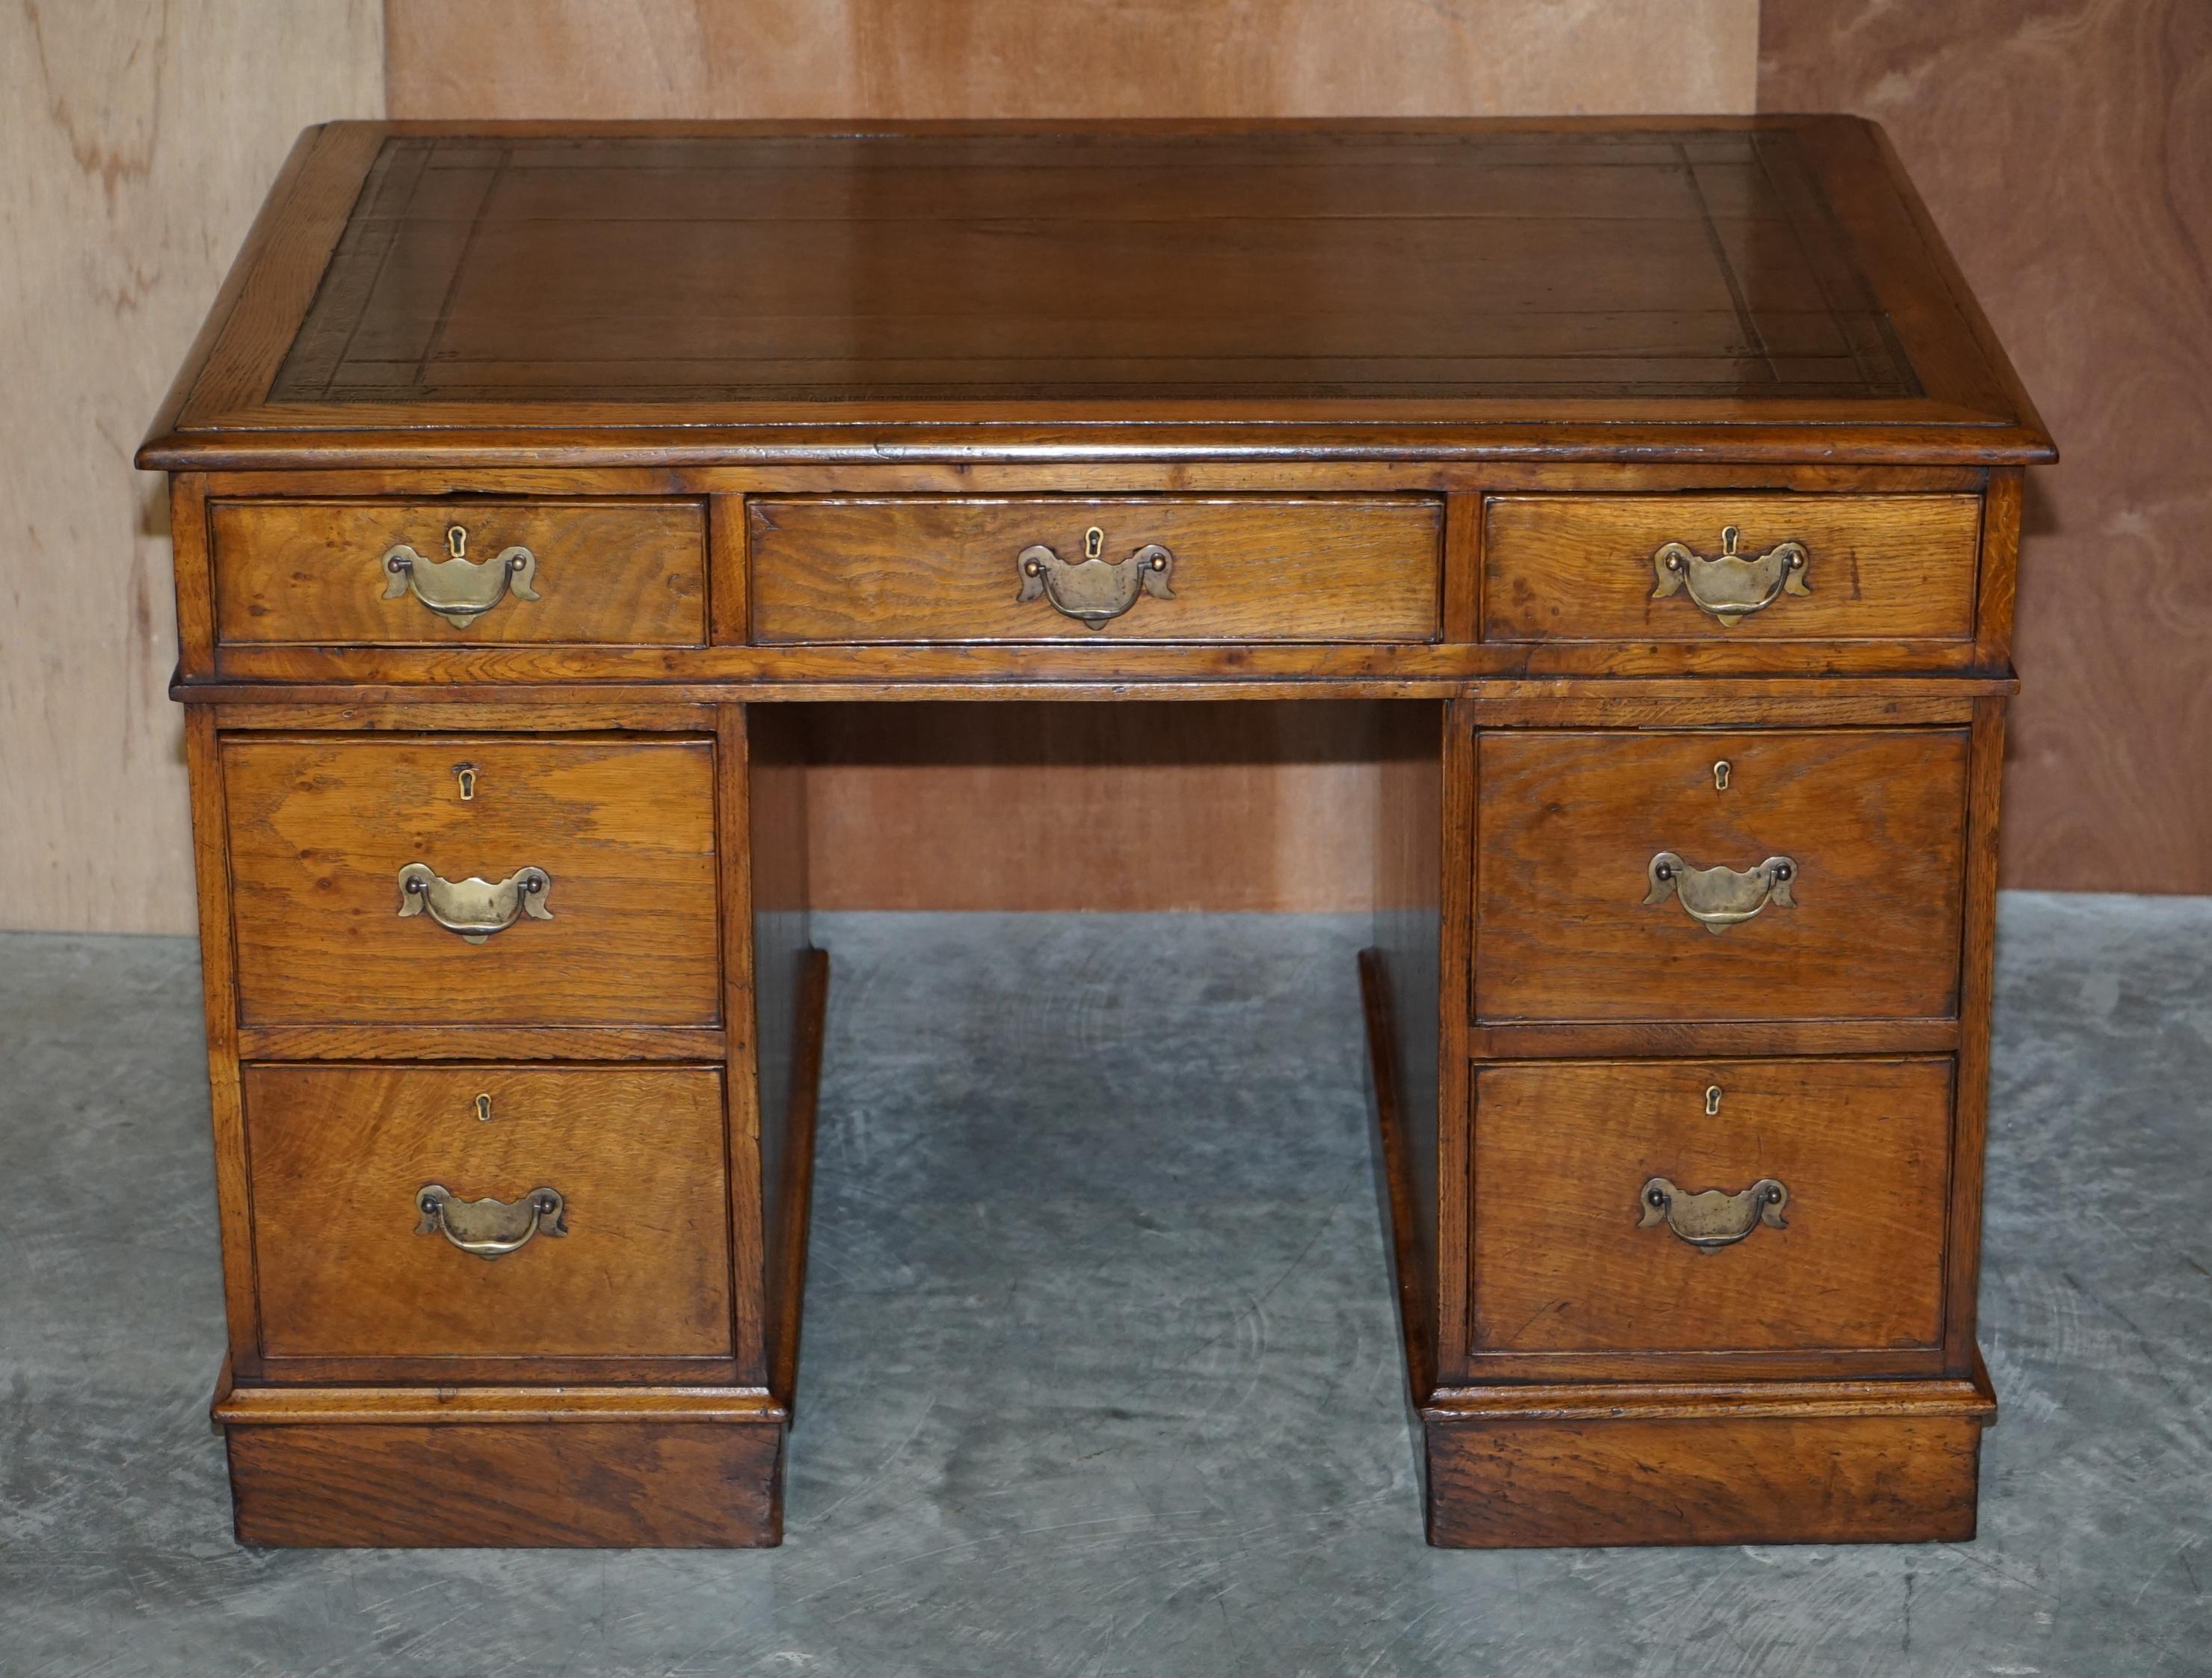 We are delighted to offer this stunning original and restored Georgian English pedestal desk in oak with a hand dyed brown leather writing surface, circa 1800

A very well made and traditional English partners pedestal desk. The timber is all oak